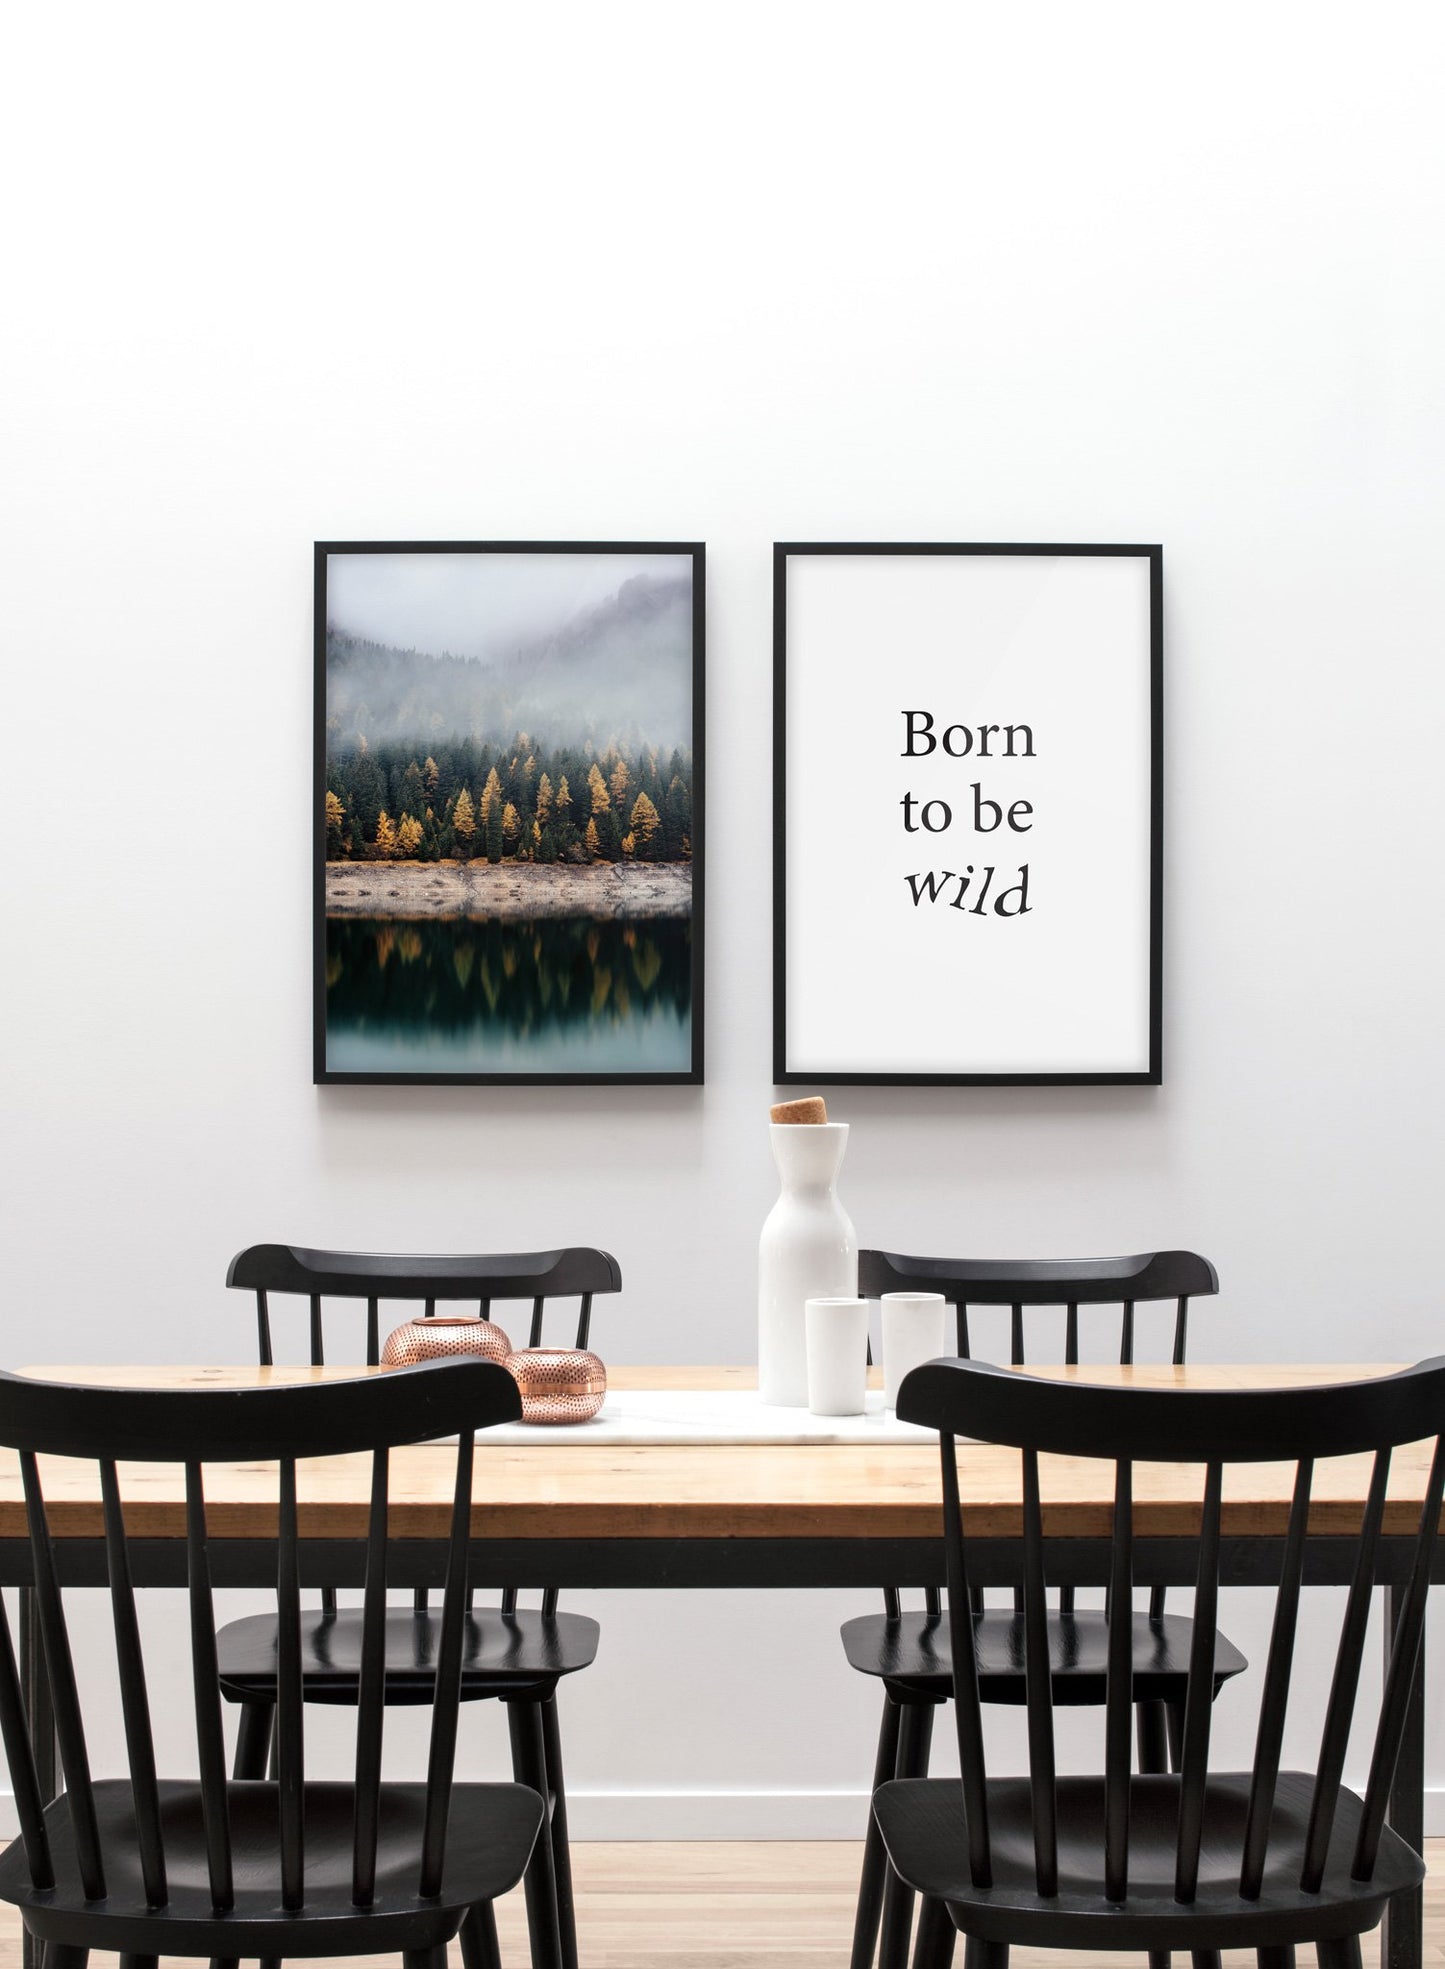 Stunning reflections - Misty lake and mountain modern minimalist photography poster by Opposite Wall - Gallery Wall Duo - Dining room